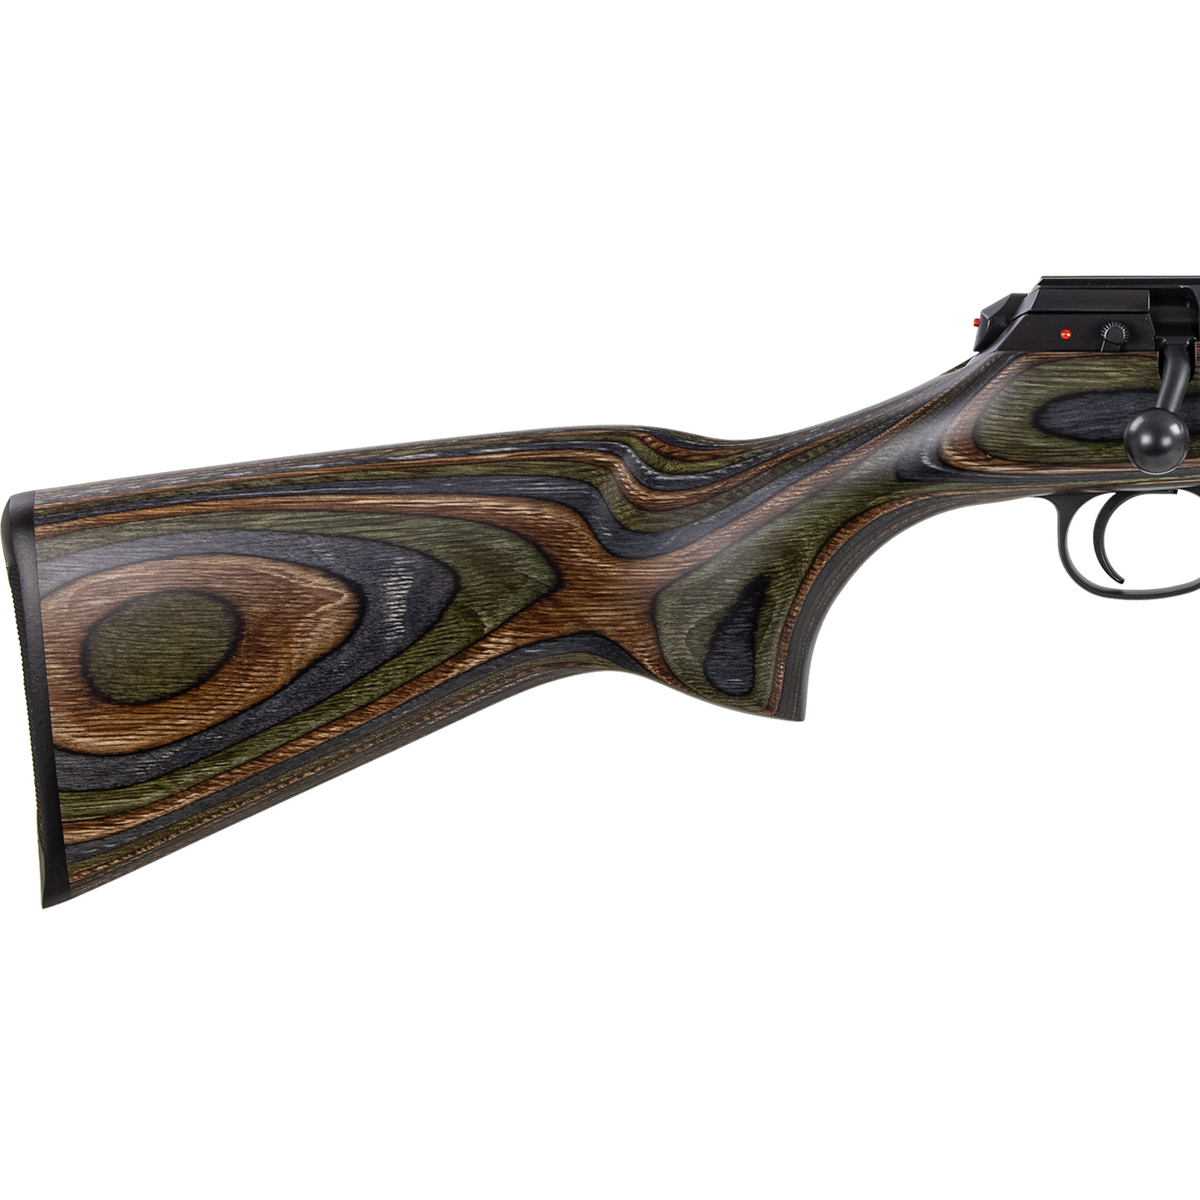 CZ 457 Scout Black/Laminate Bolt Action Rifle 22 Long Rifle – 16in ...